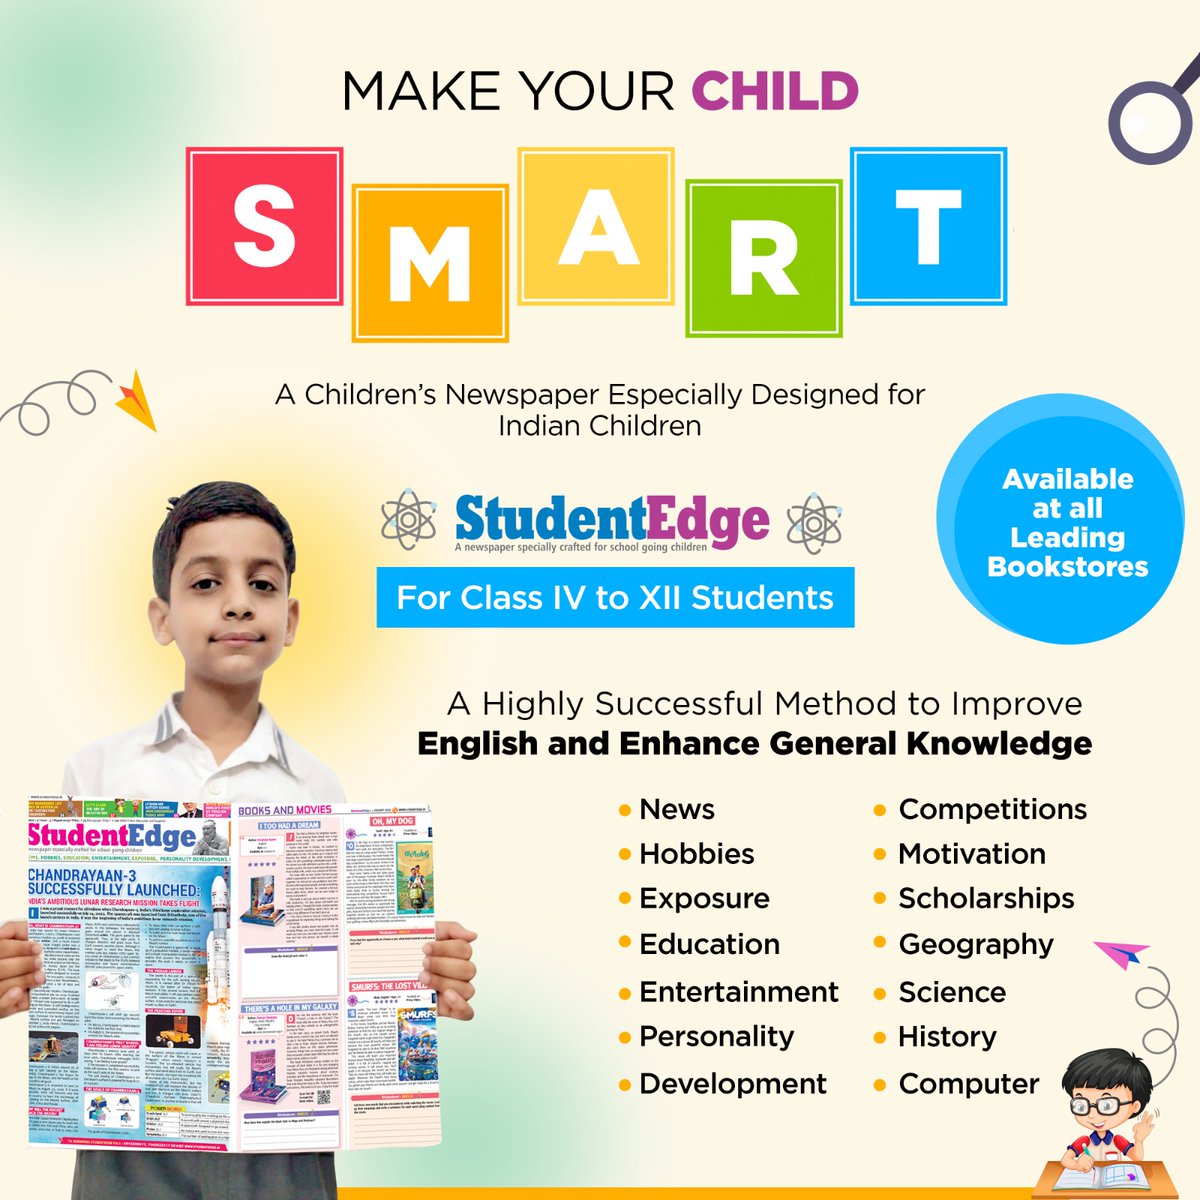 📚 Unlock Your Child's Potential with 'SmartKids Times' 🌟

Parents, we know you want the best for your children! 💡 Give them the gift of knowledge and curiosity with our brand-new children's newspaper, 'SmartKids Times' 📰. 🇮🇳

#SmartKidsTimes #EducationMatters #CuriousMinds